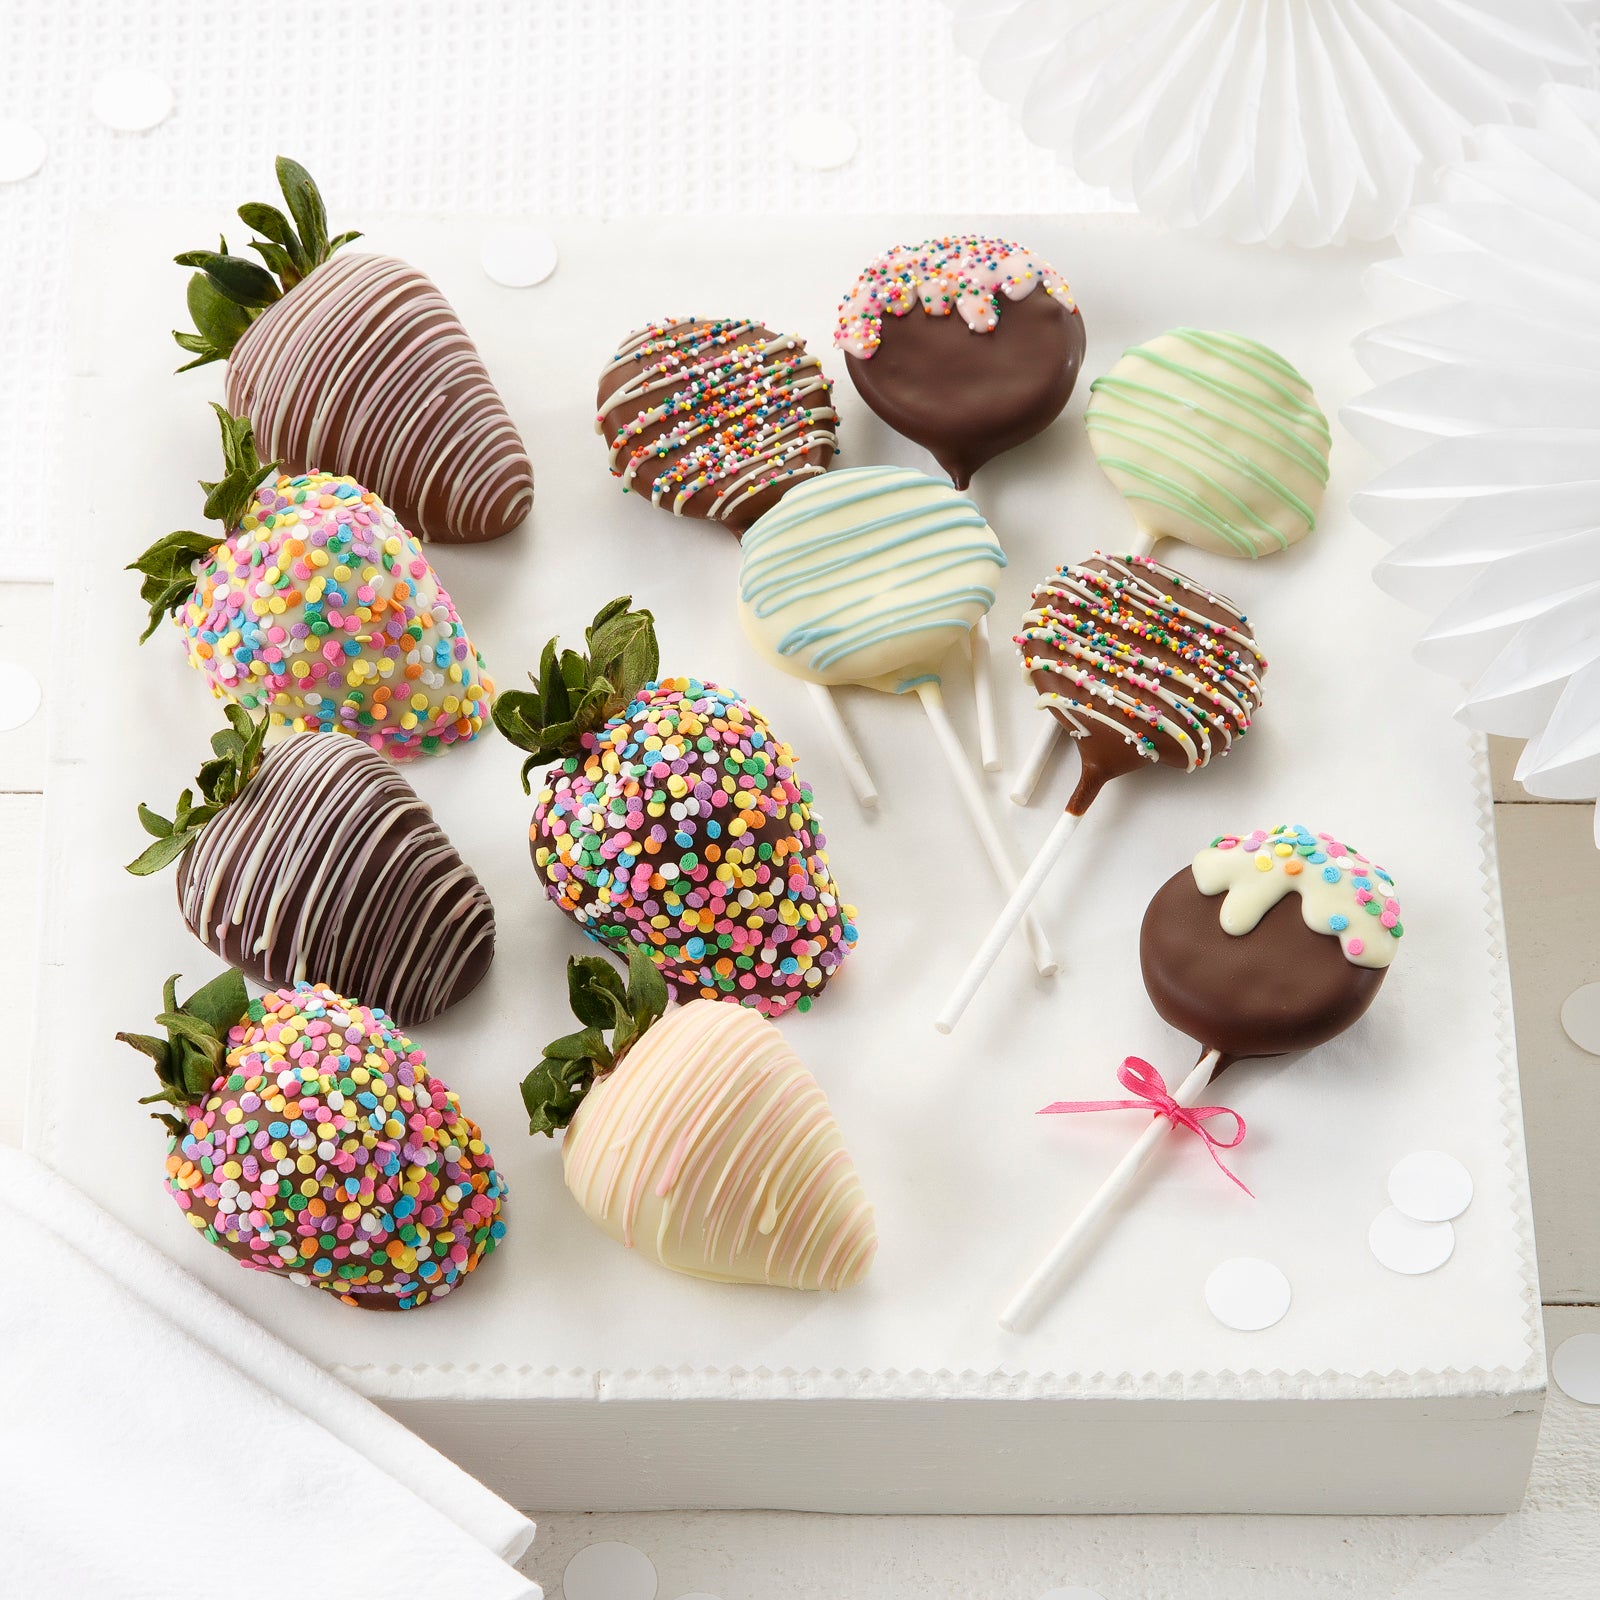 Chocolate Covered Company Valentine's Day Belgian 6 Chocolate Covered  Strawberries and 6 Mini Cheesecake Pops